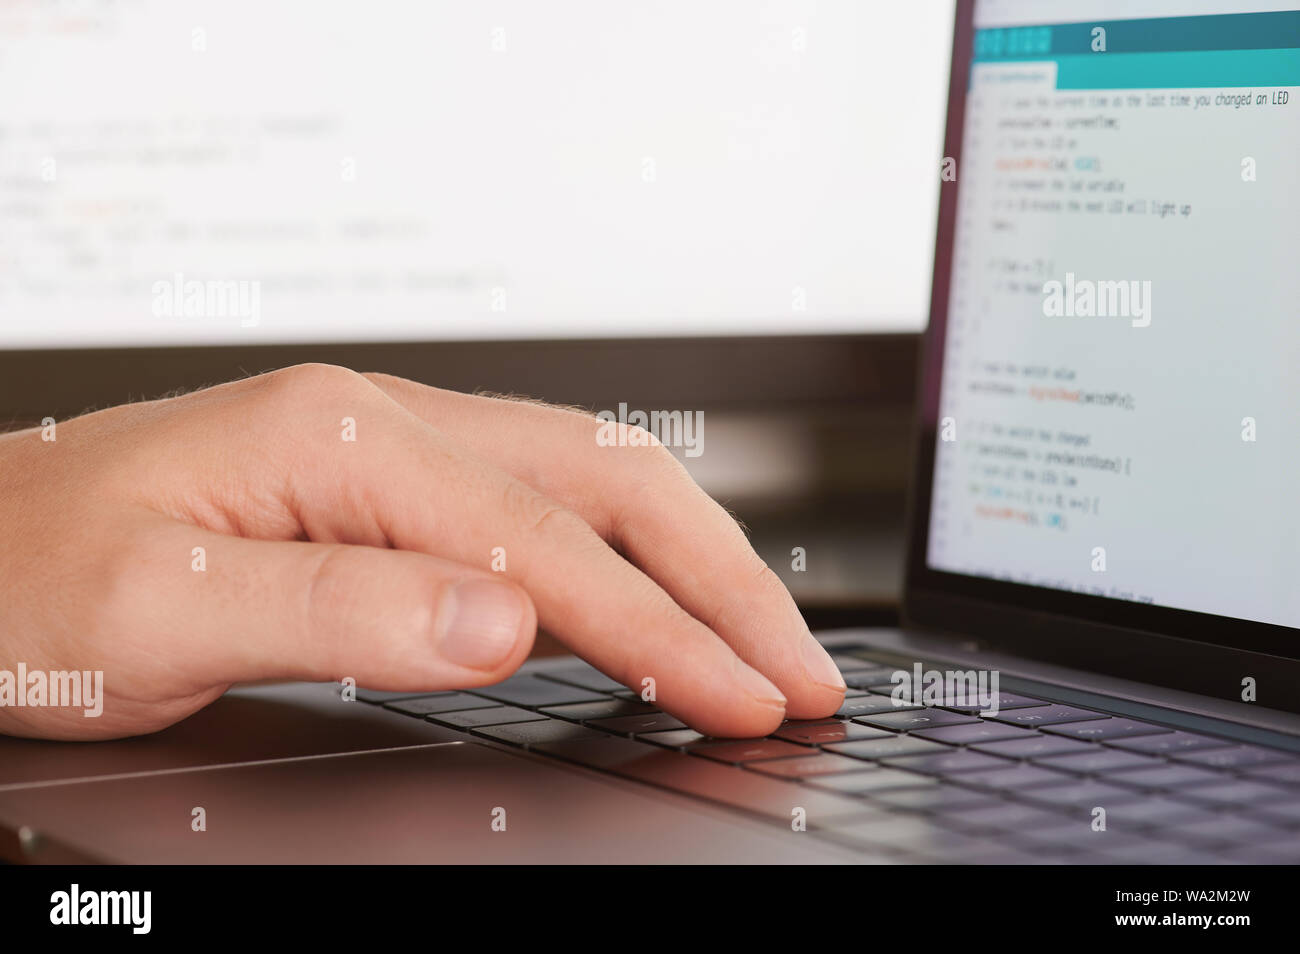 Man typing programming code close up view on blurred screen background Stock Photo